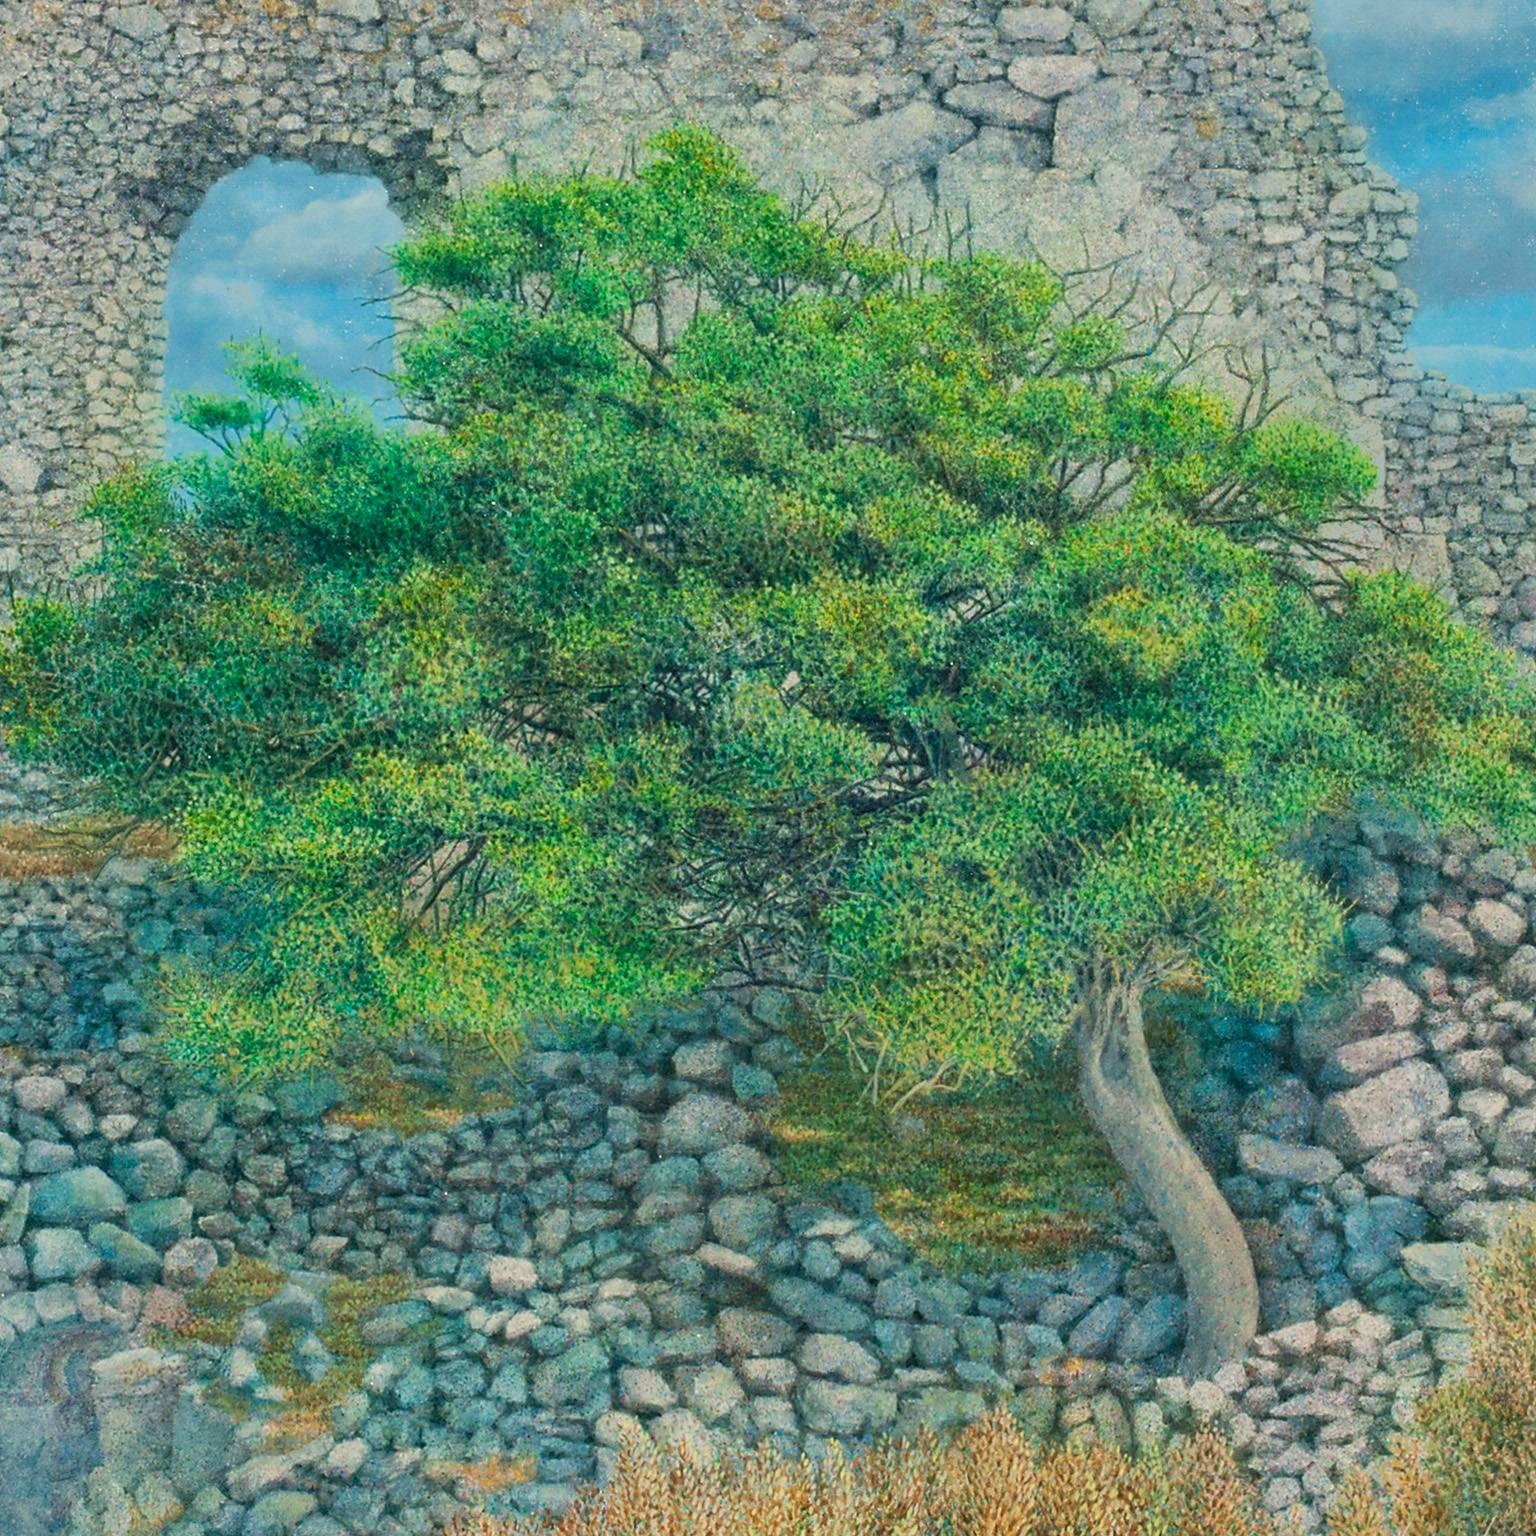 George Tzannes's Ancient Ruins at Paliochora With Tree is a 52 x 60 inches oil painting. The ruins of a Byzantine church, typical of the Greek countryside landscape, are the focus of this particular artwork. The viewer is drawn into the timeless,